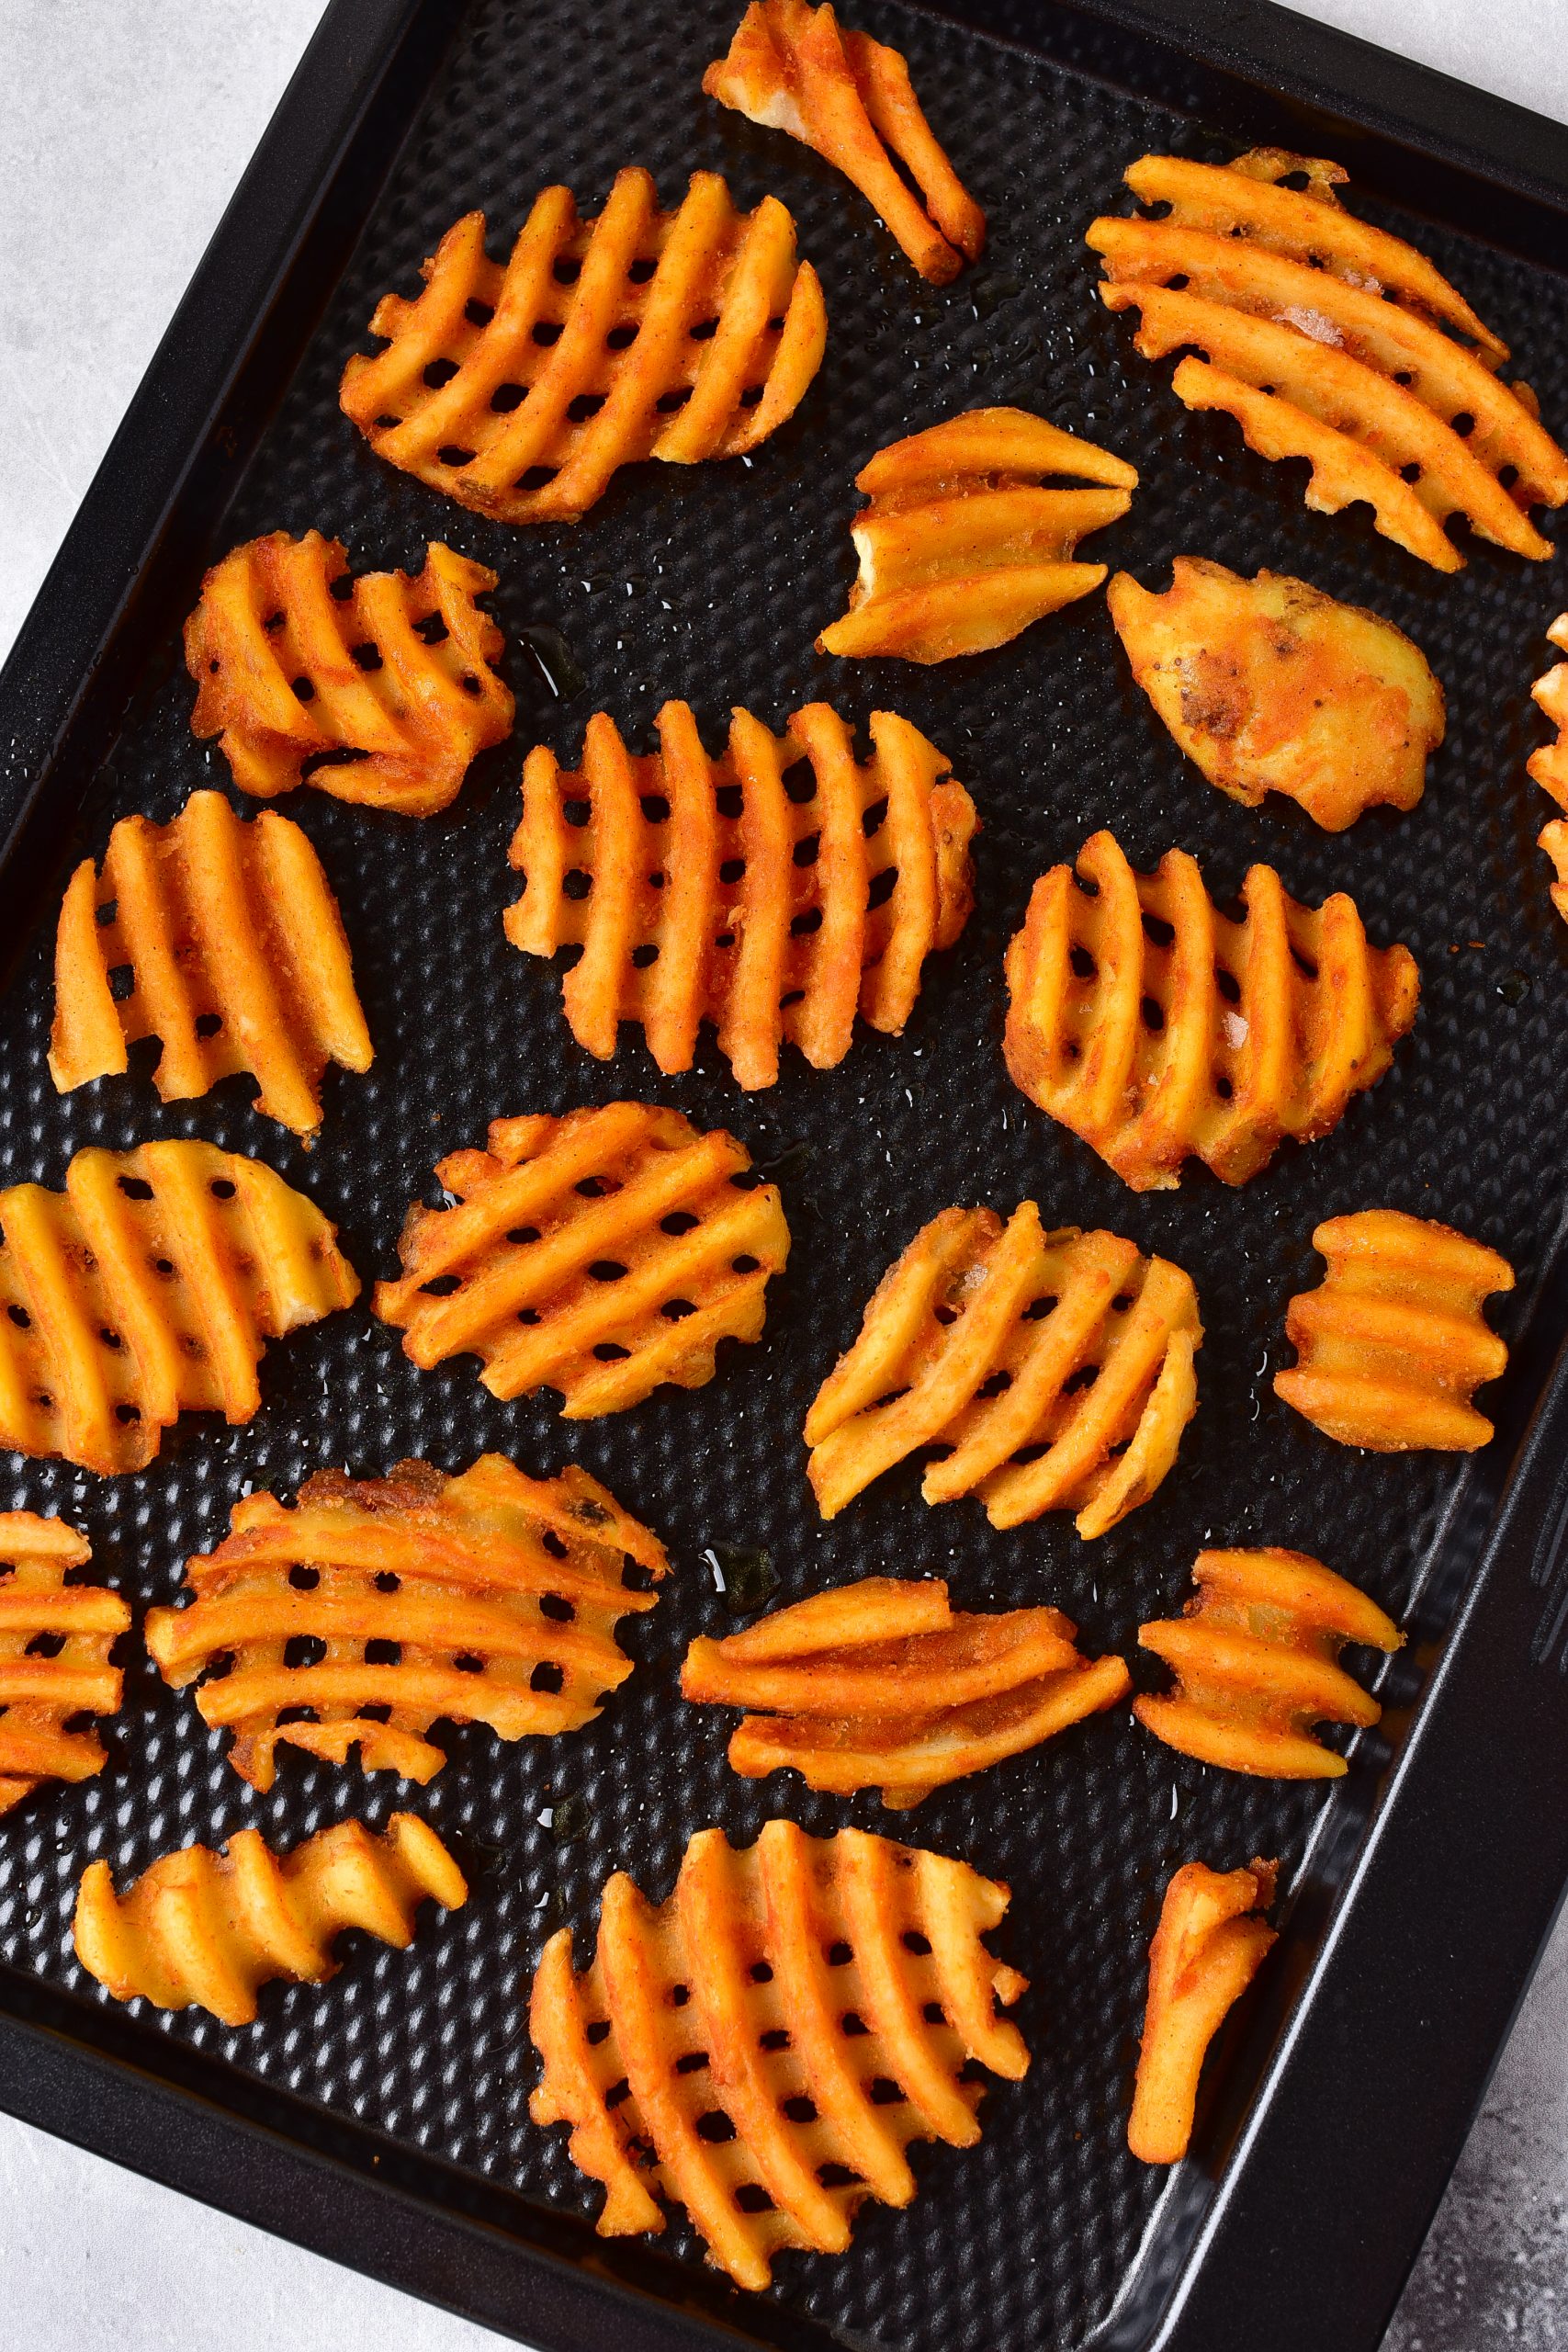 Layer the waffle fries on a baking sheet, and bake in a 400-degree oven according to the package instructions. 